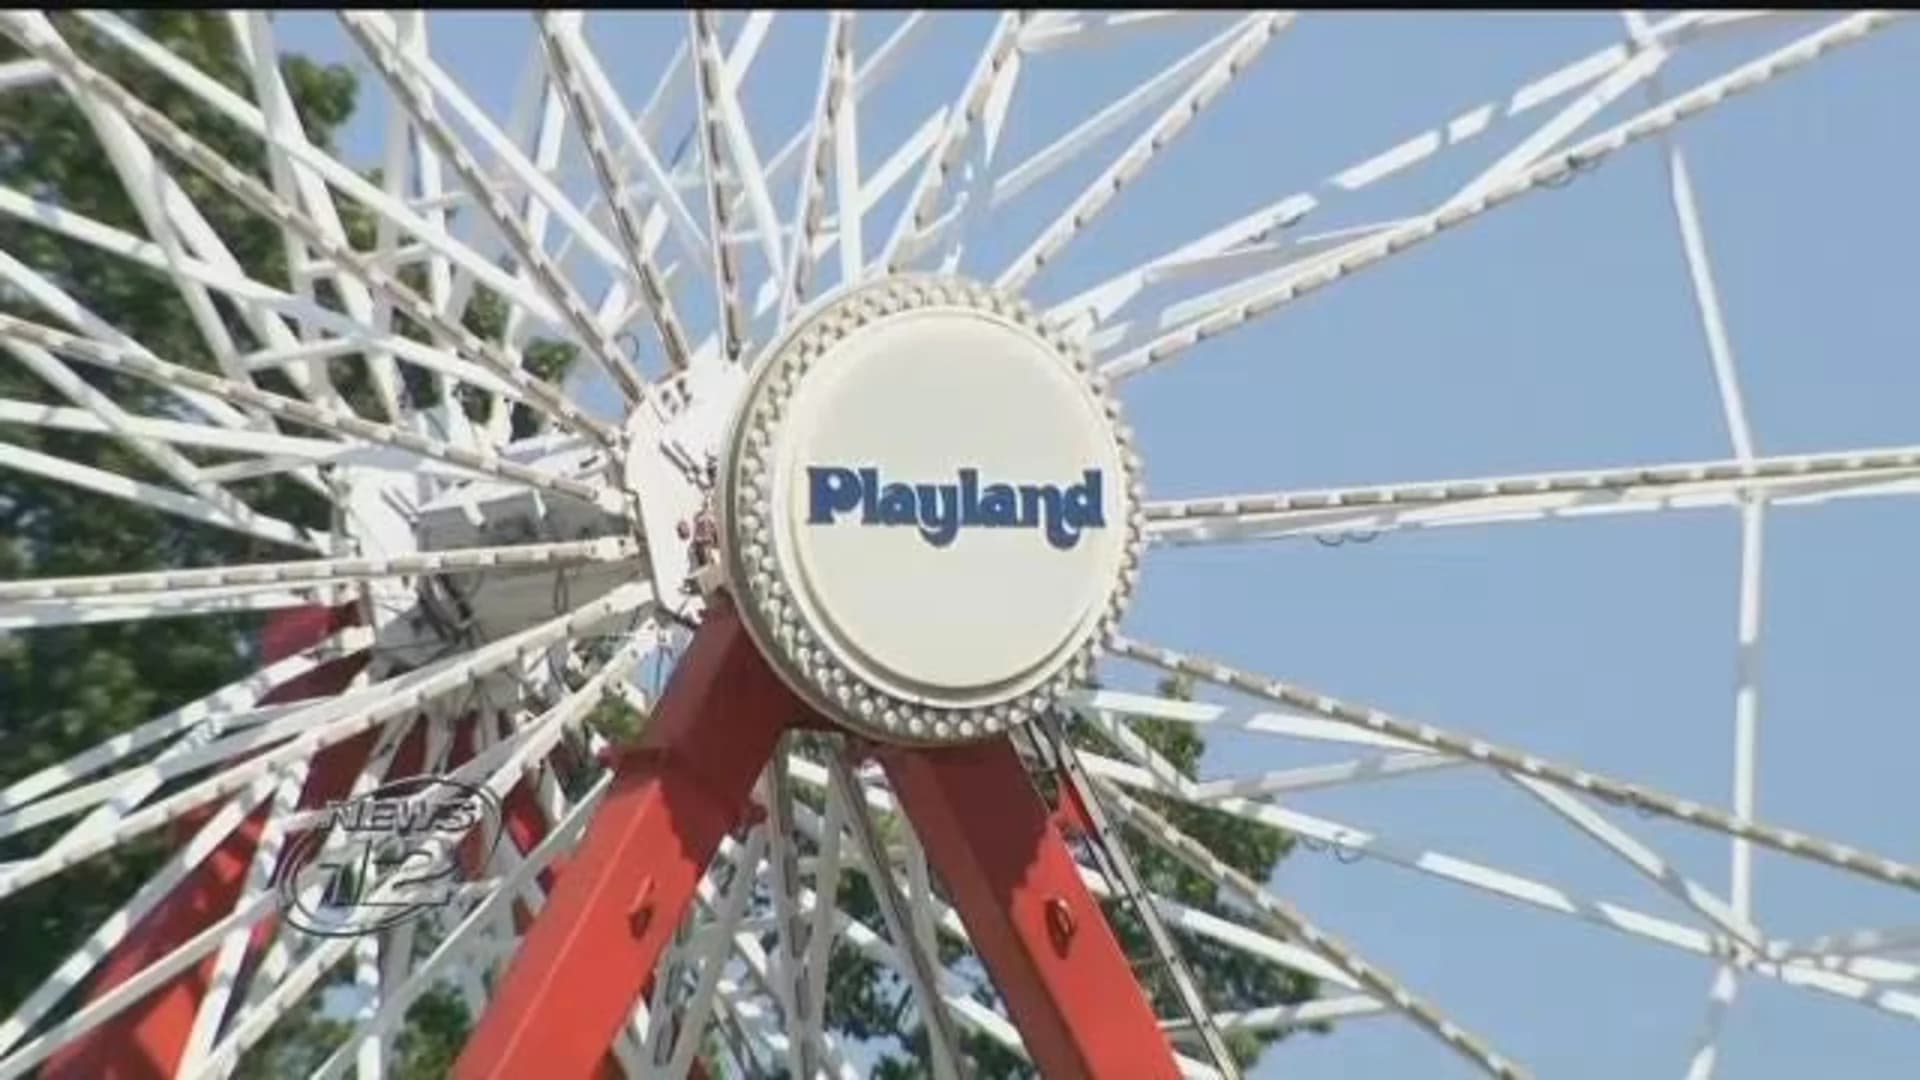 Woman says she was asked to remove hijab at Playland